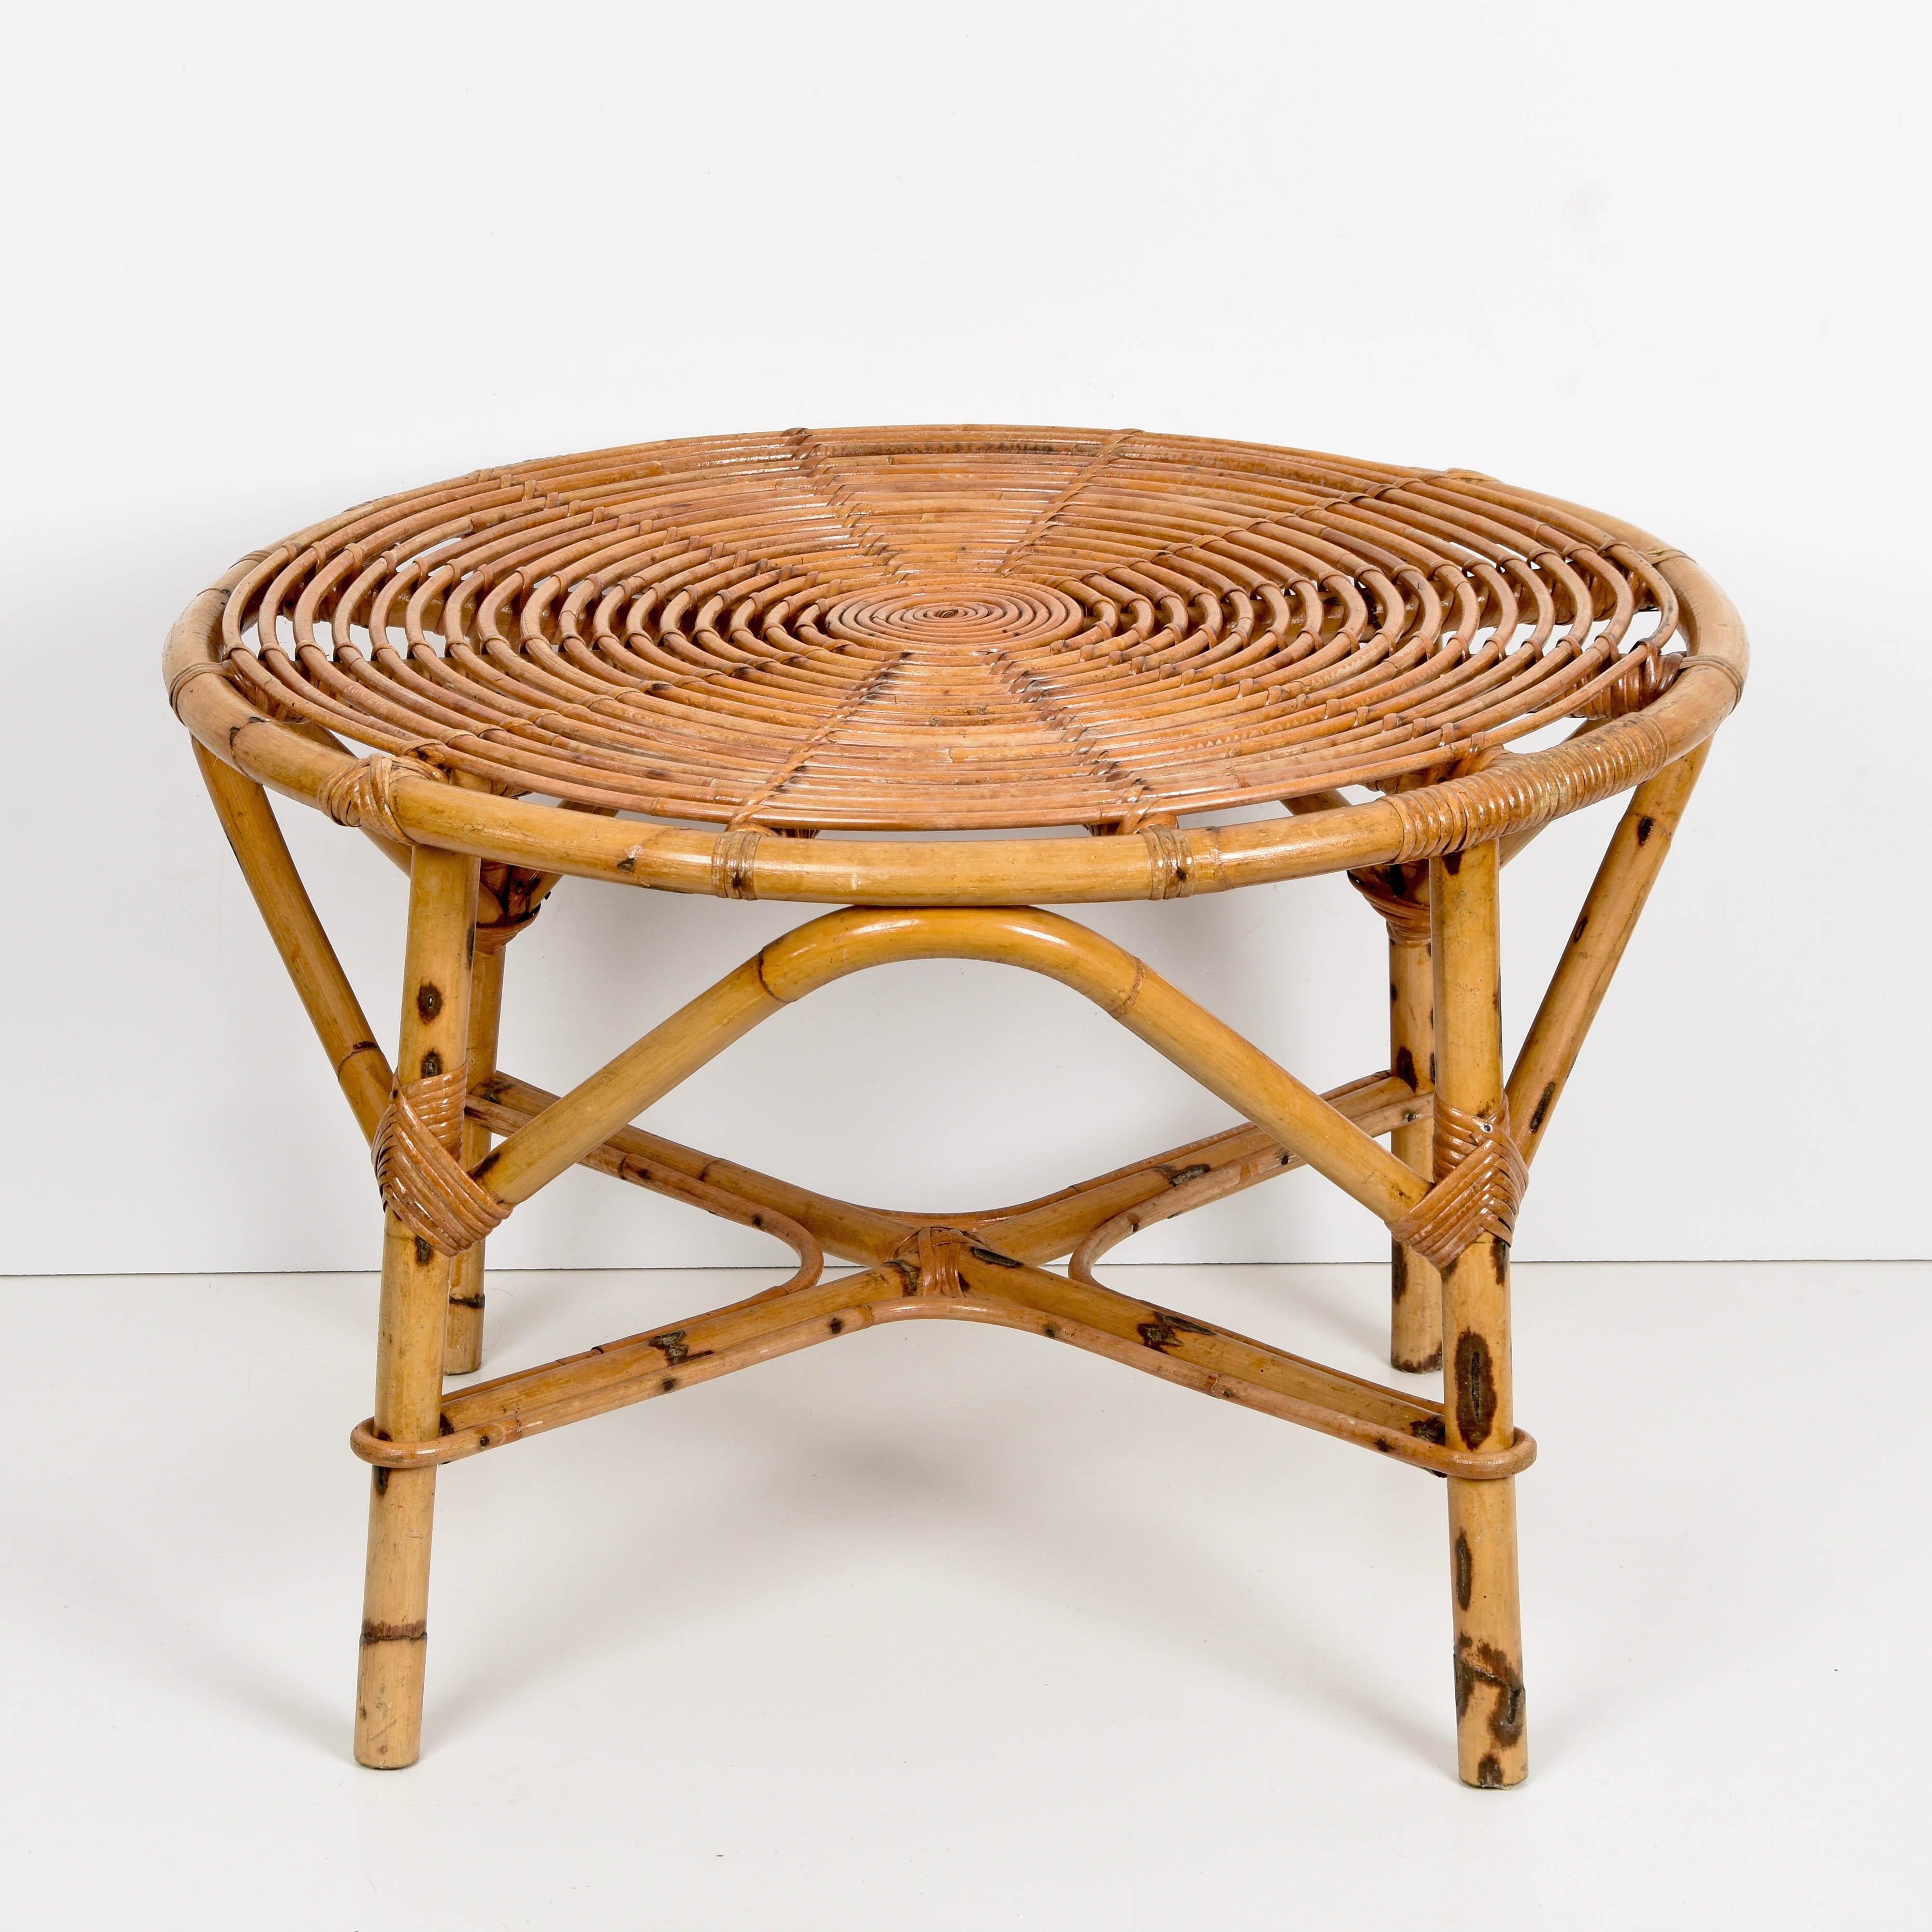 Amazing midcentury Tito Agnoli round rattan and bamboo coffee table.

This wonderful bamboo and rattan coffee table is attributable to Tito Agnoli, it was produced in Italy during the 1960s.

This item is very useful and adaptable due to its